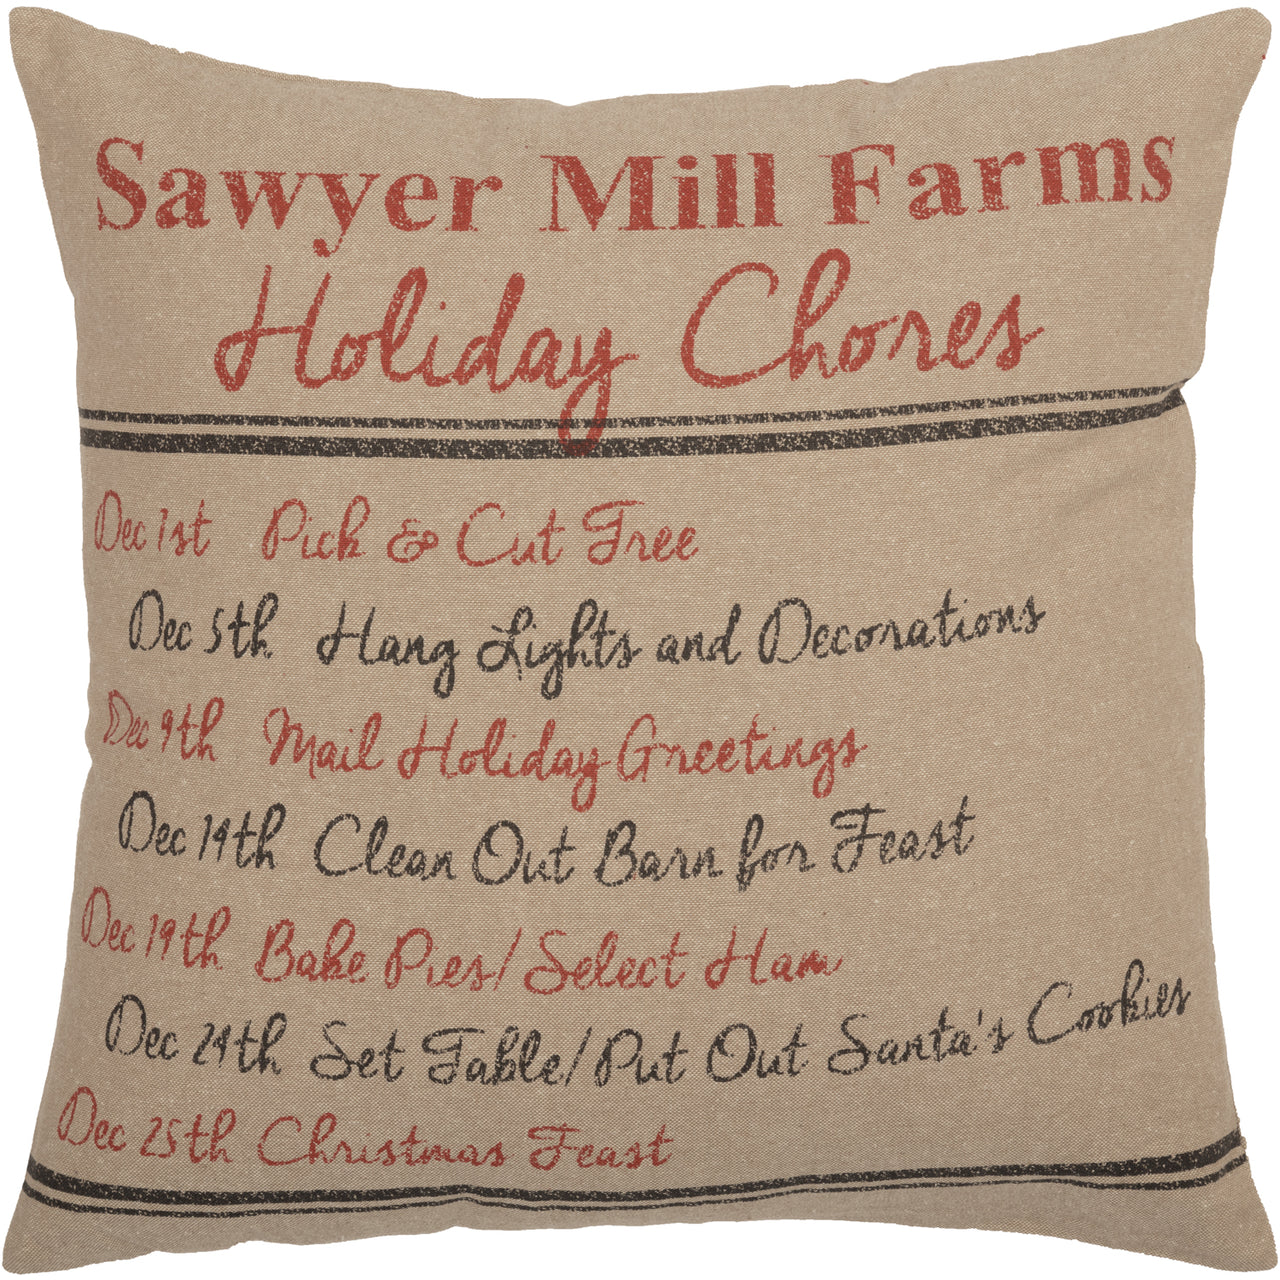 Sawyer Mill Holiday Chores Pillow 18x18 VHC Brands